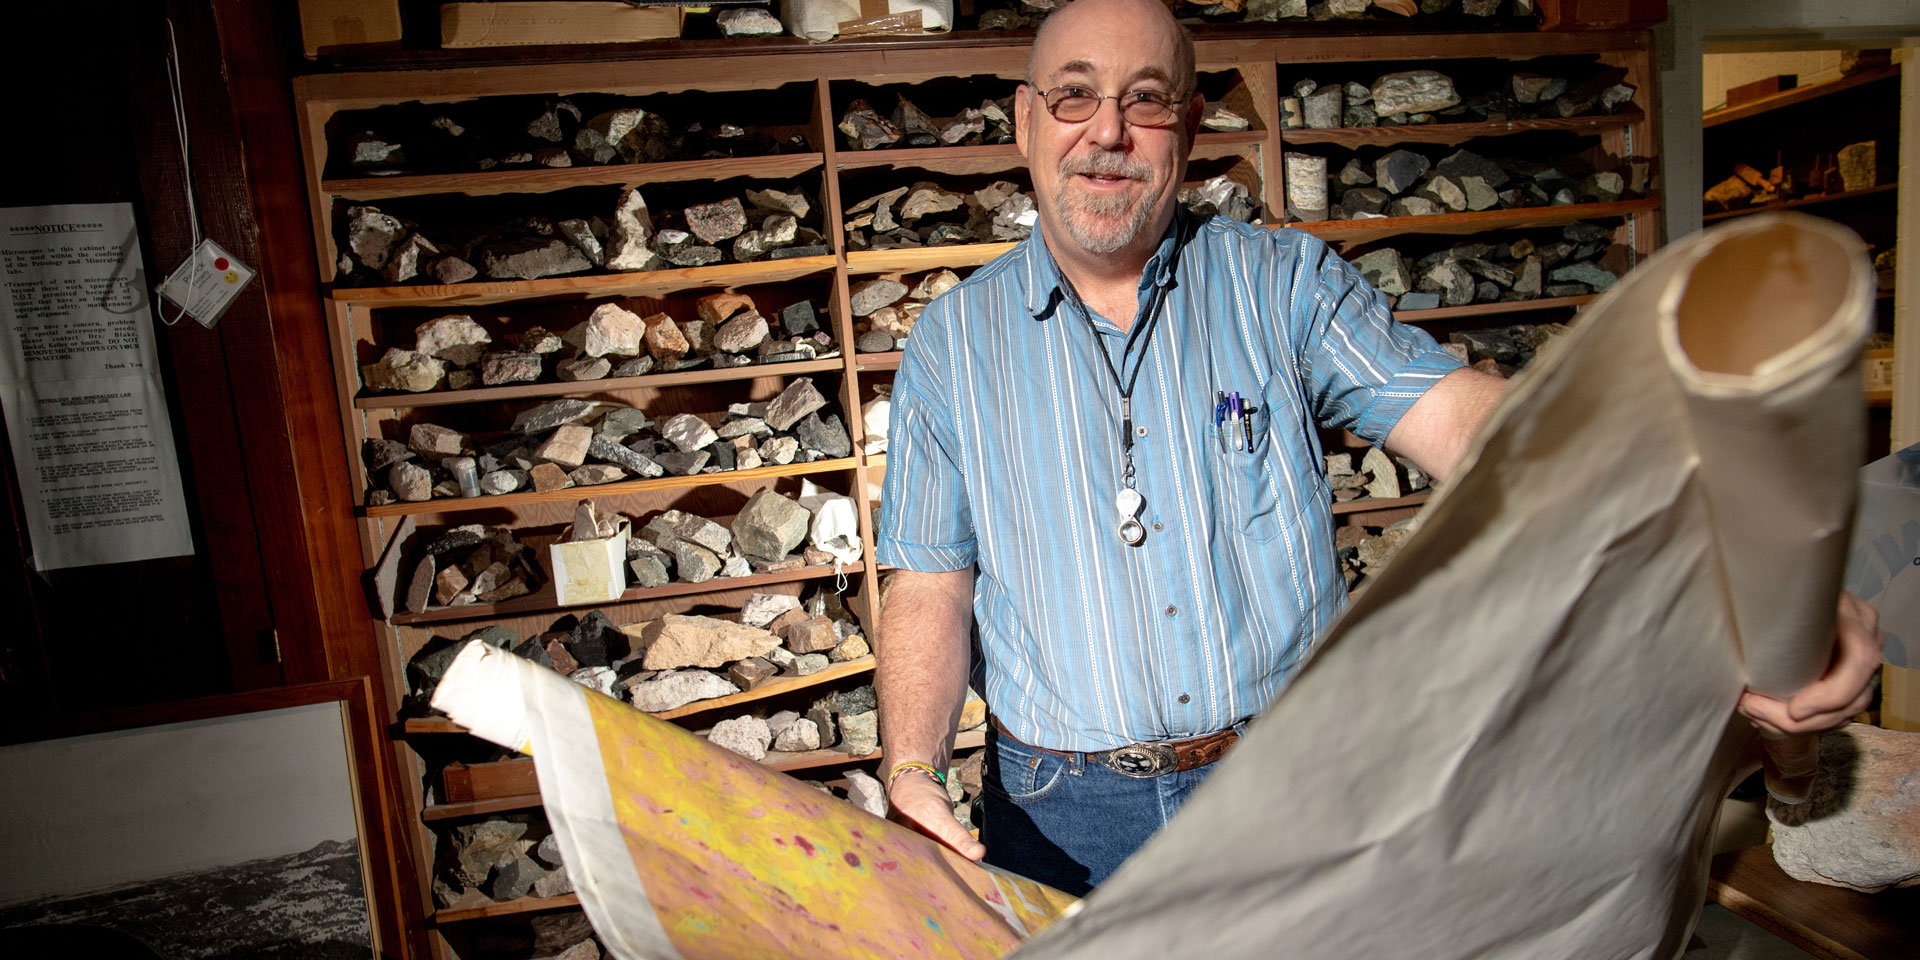 A professor standing in front of shelves of rocks holding a map